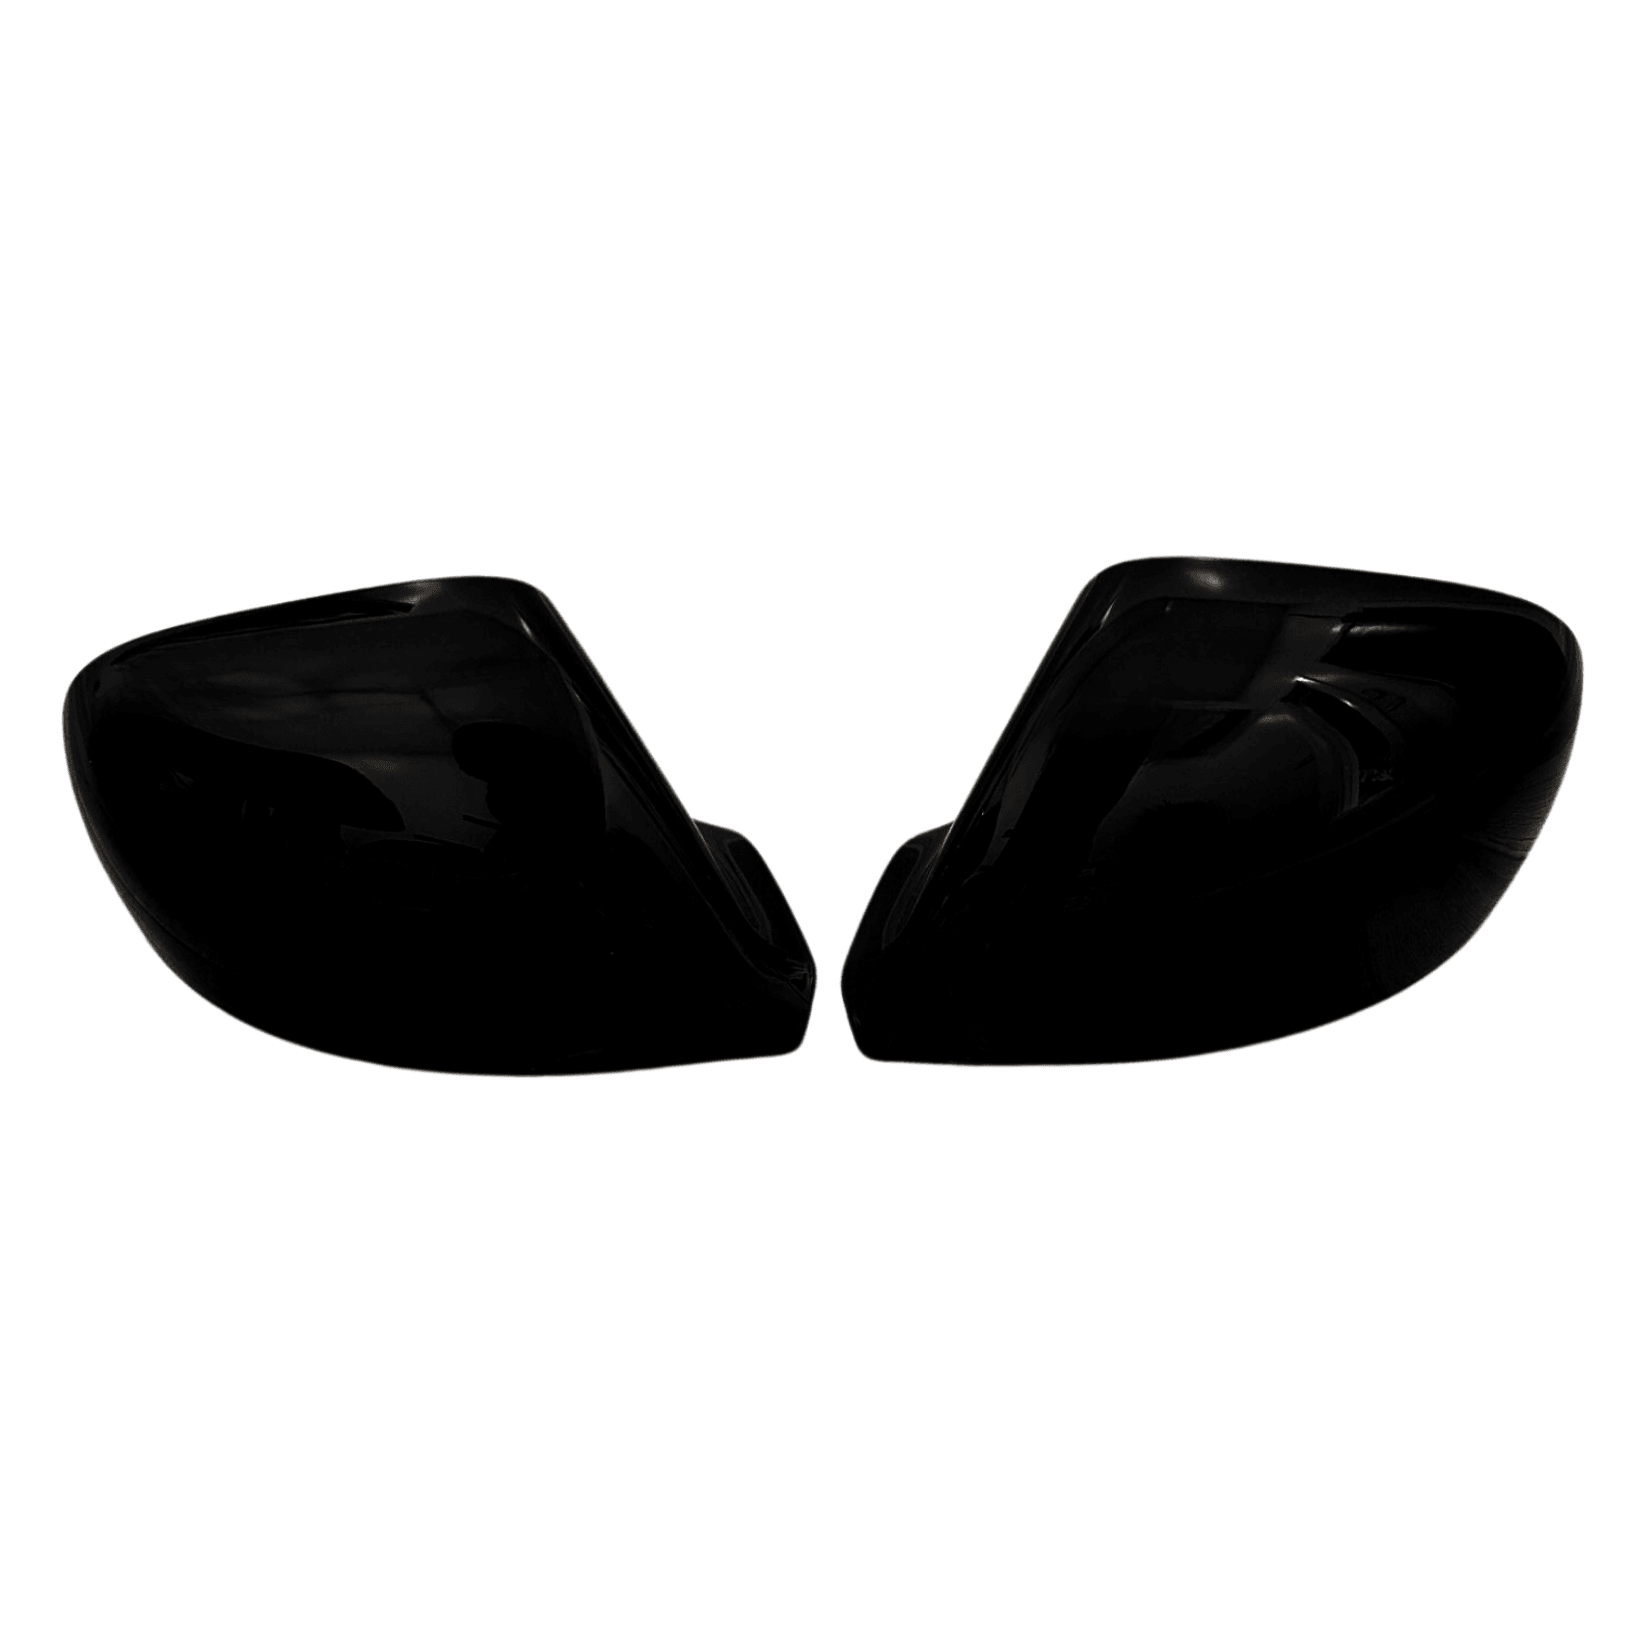 Vw Transporter T5 T6 T6.1 Mirror Covers In Gloss Black - Pair – Storm  Xccessories